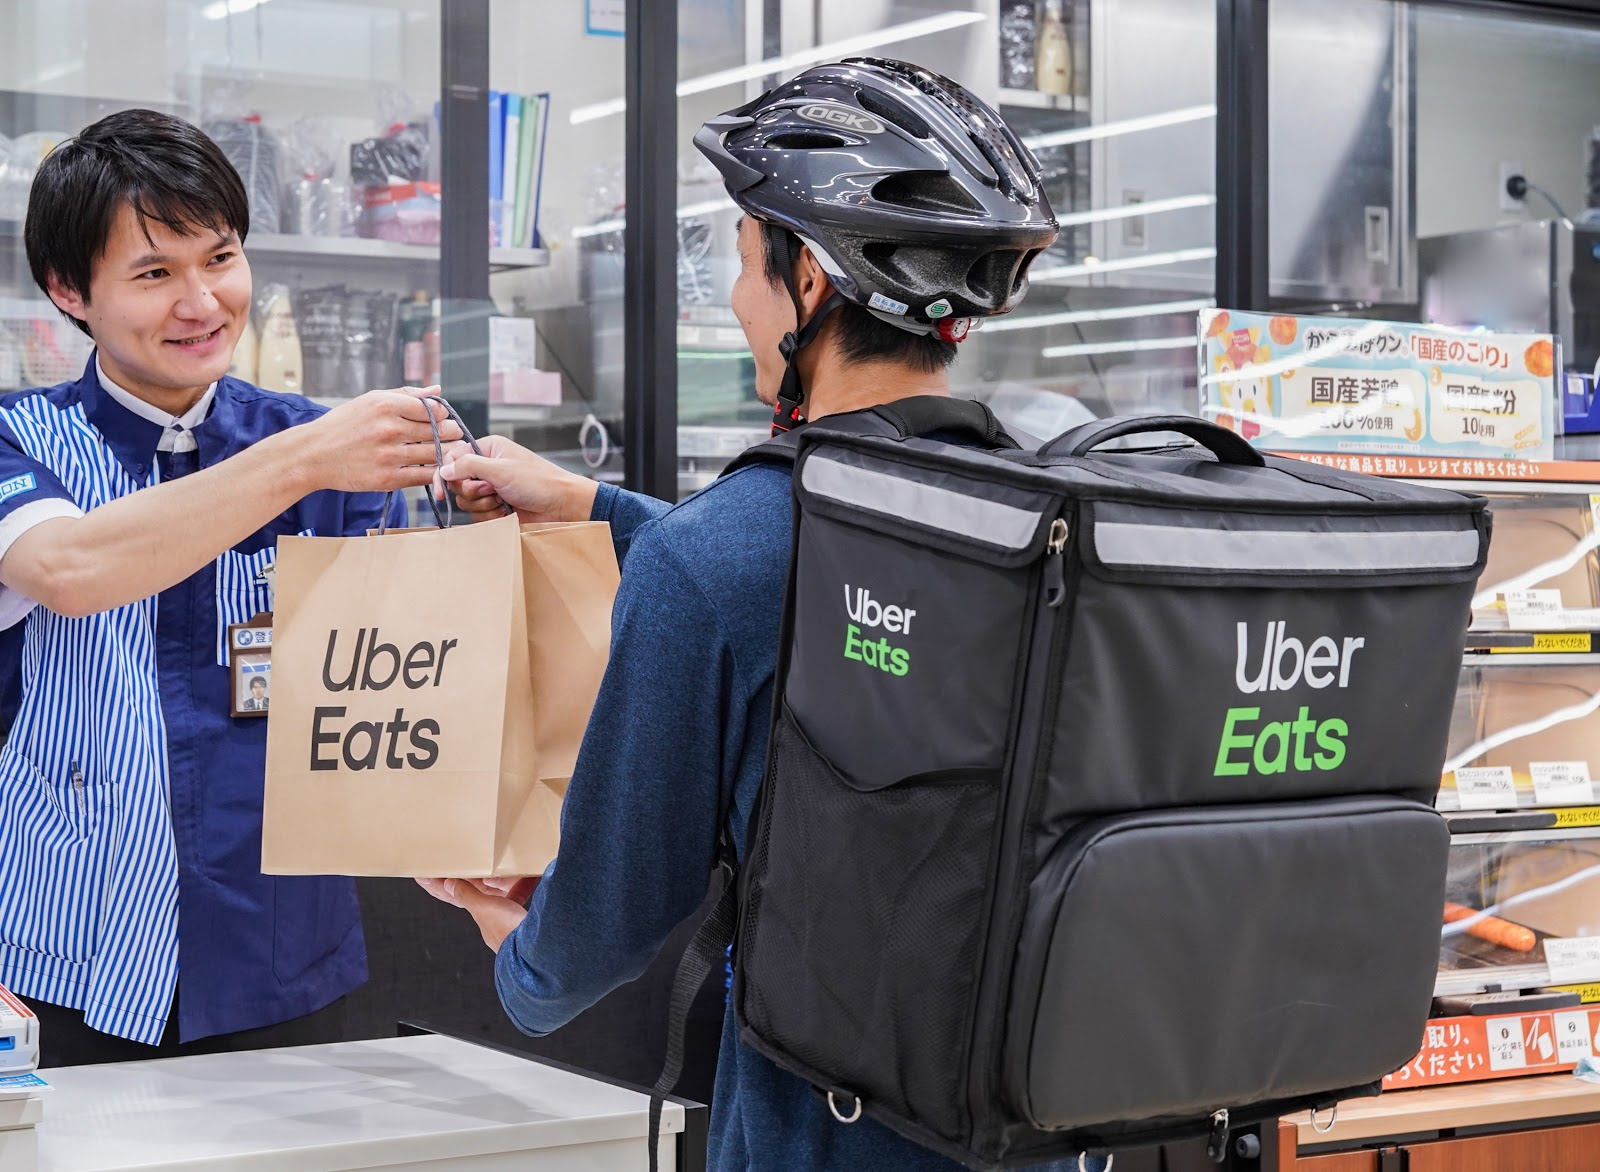 Uber Eats allows Delivery of OTC Drugs from Lawson